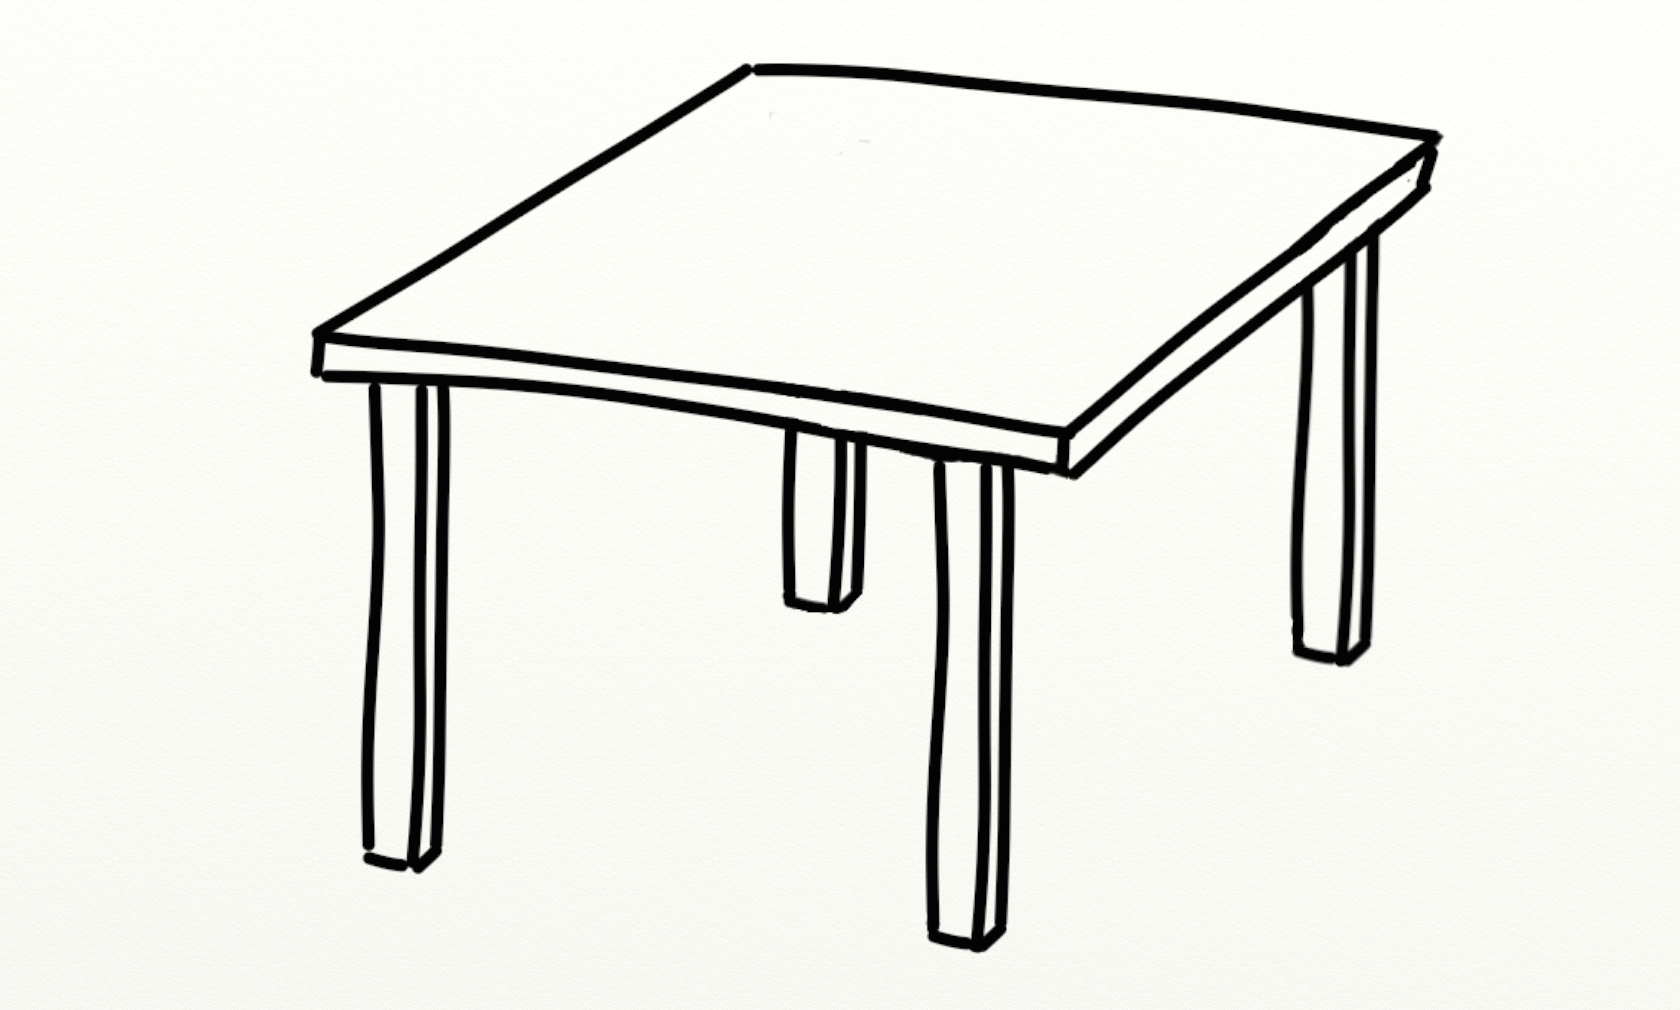 Clipart black and white table - ClipartFox